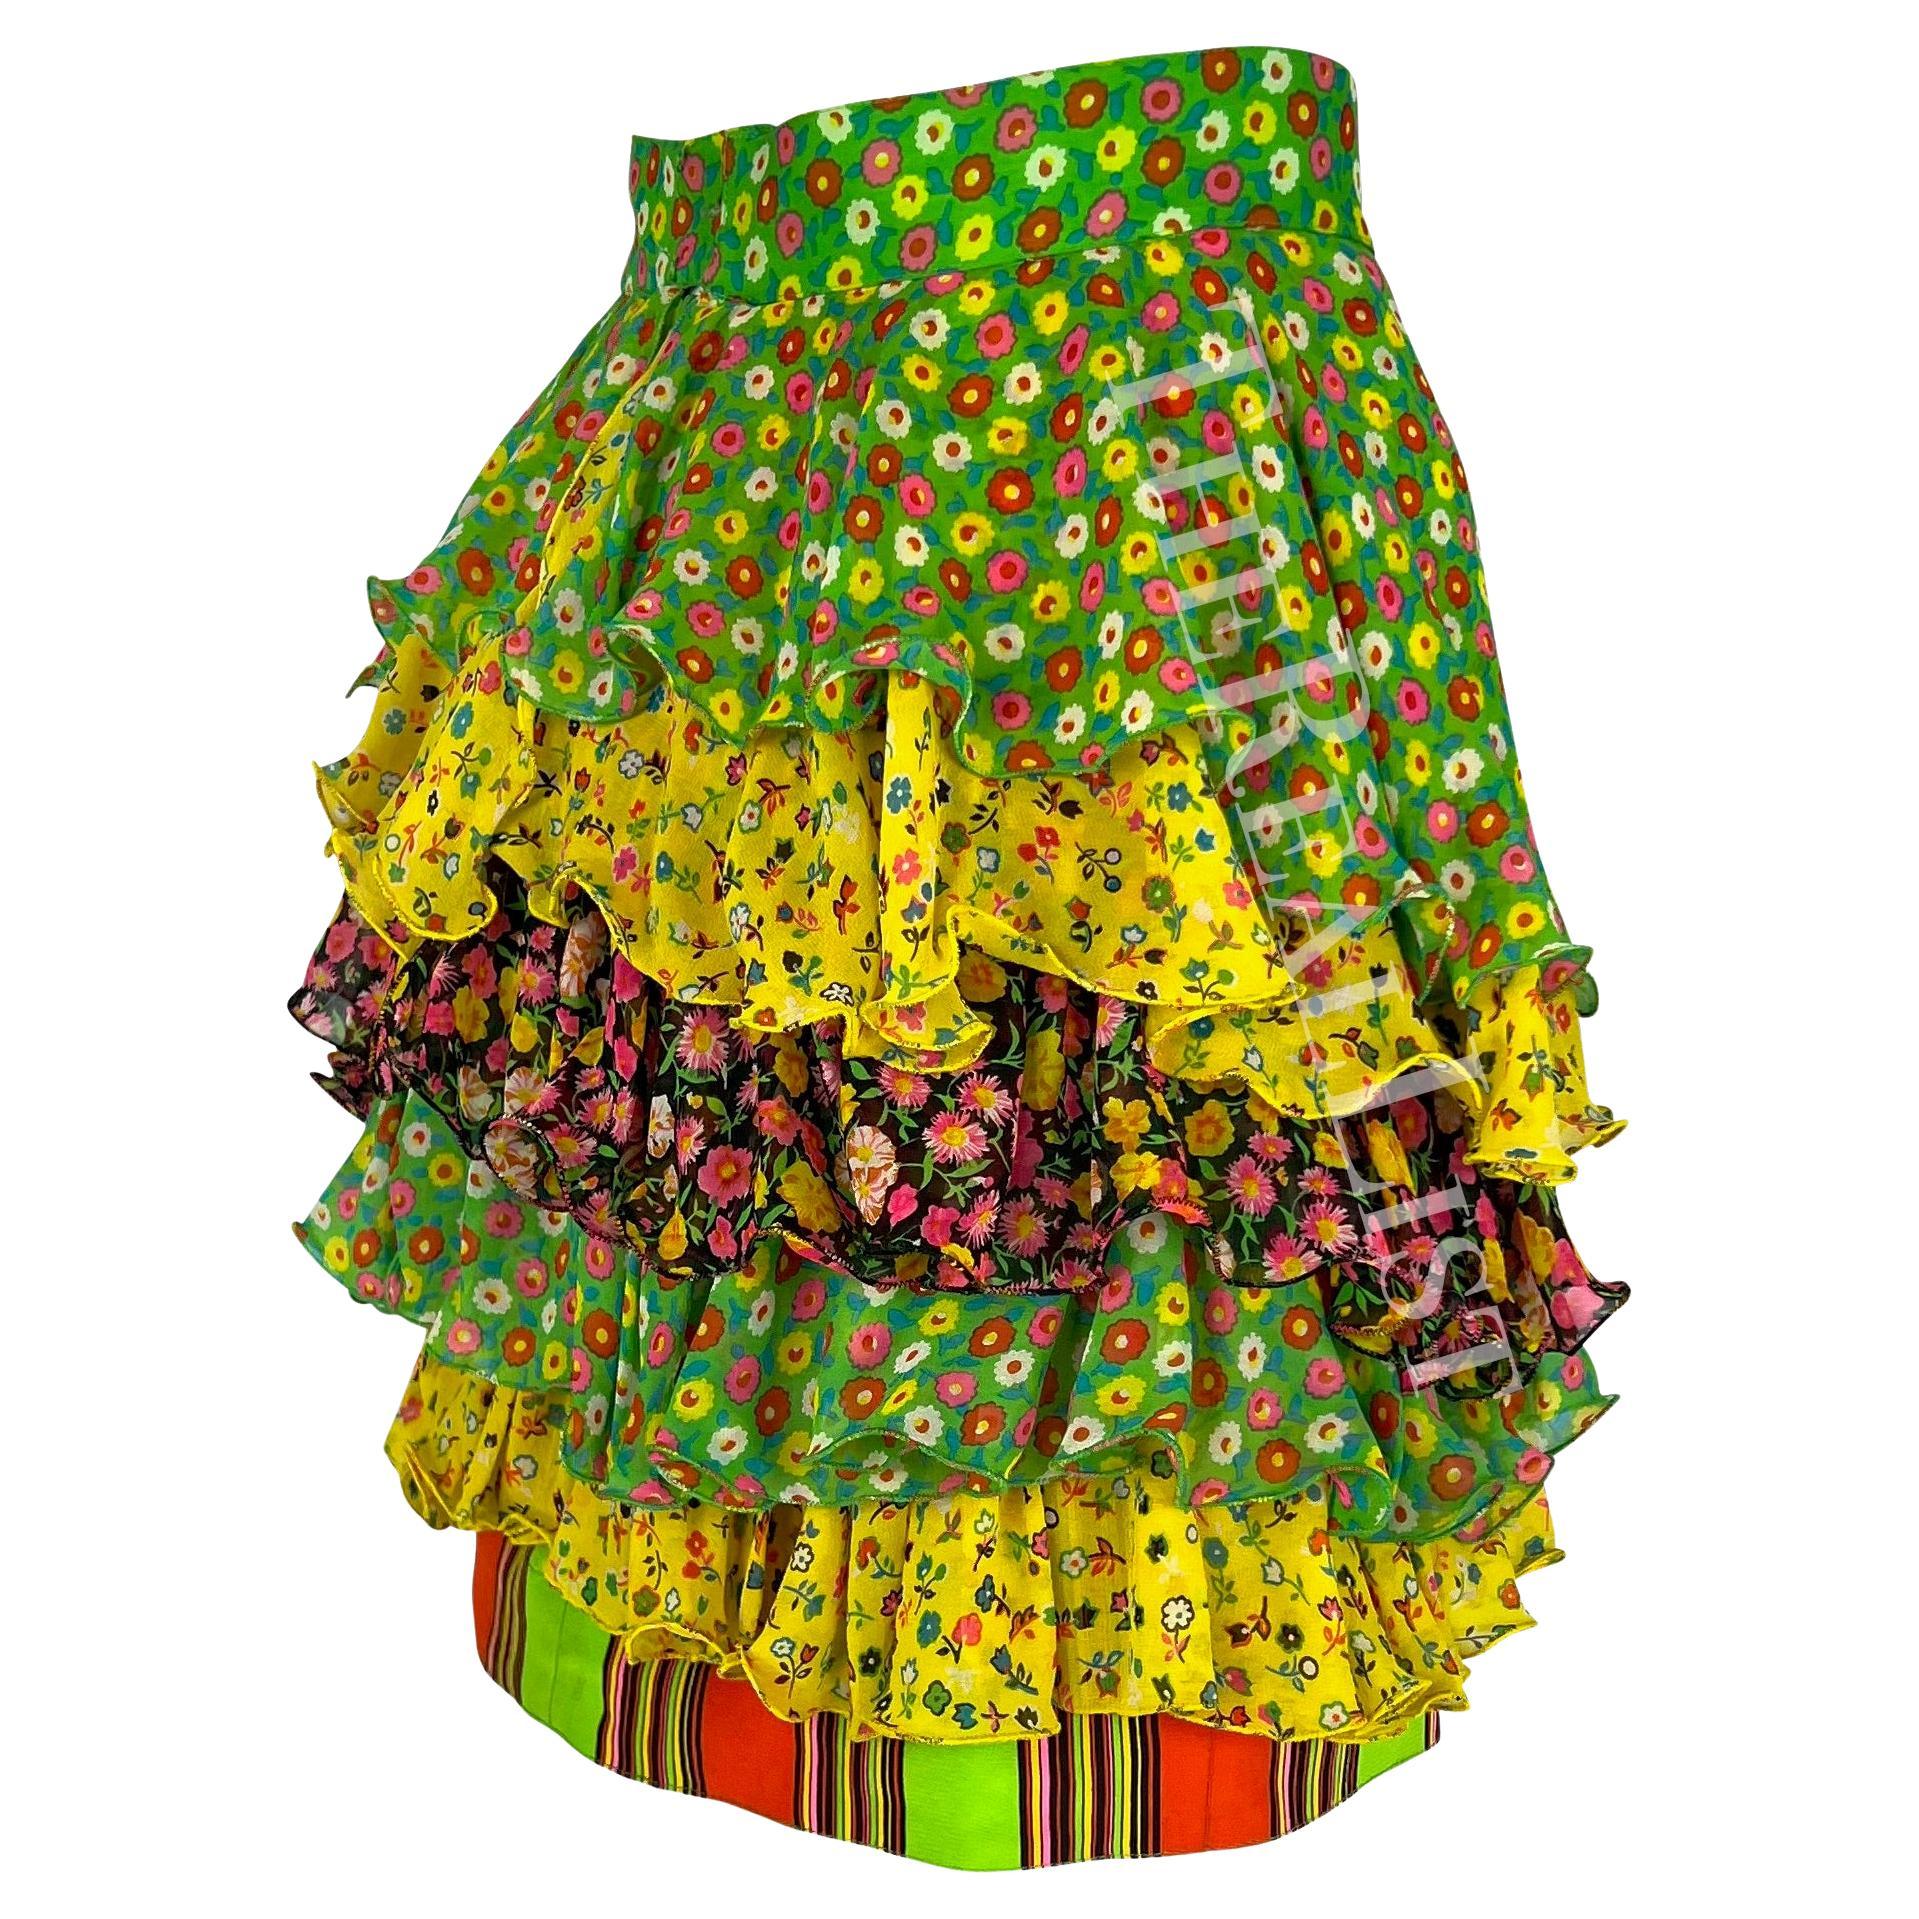 S/S 1993 Gianni Versace Tiered Floral Multicolor Runway Mini Skirt For Sale 1